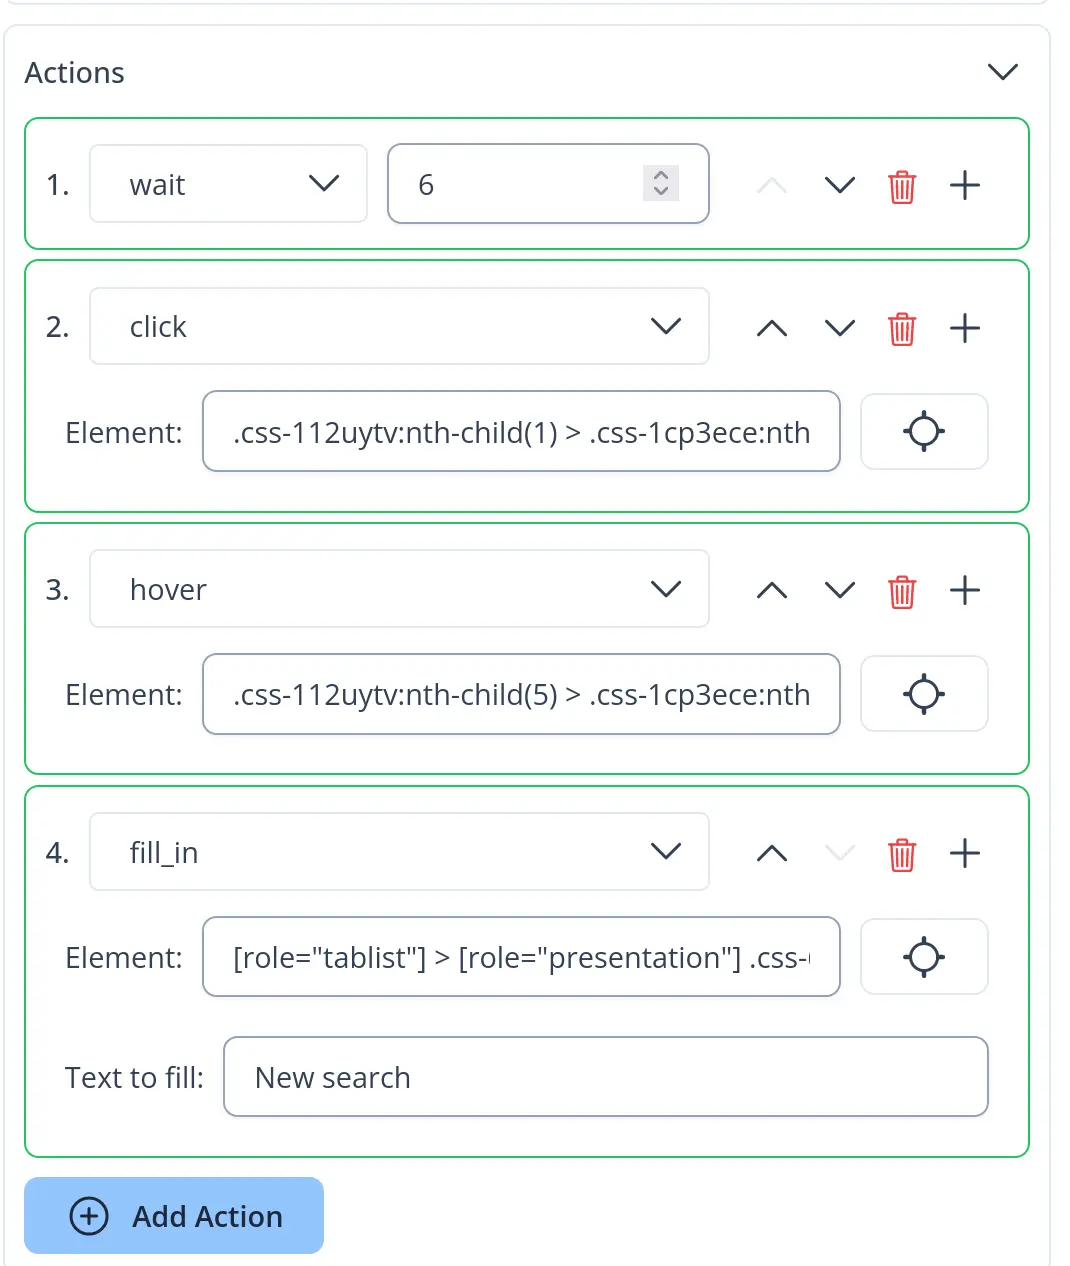 Perform actions before detecting web page changes - pagediff.io